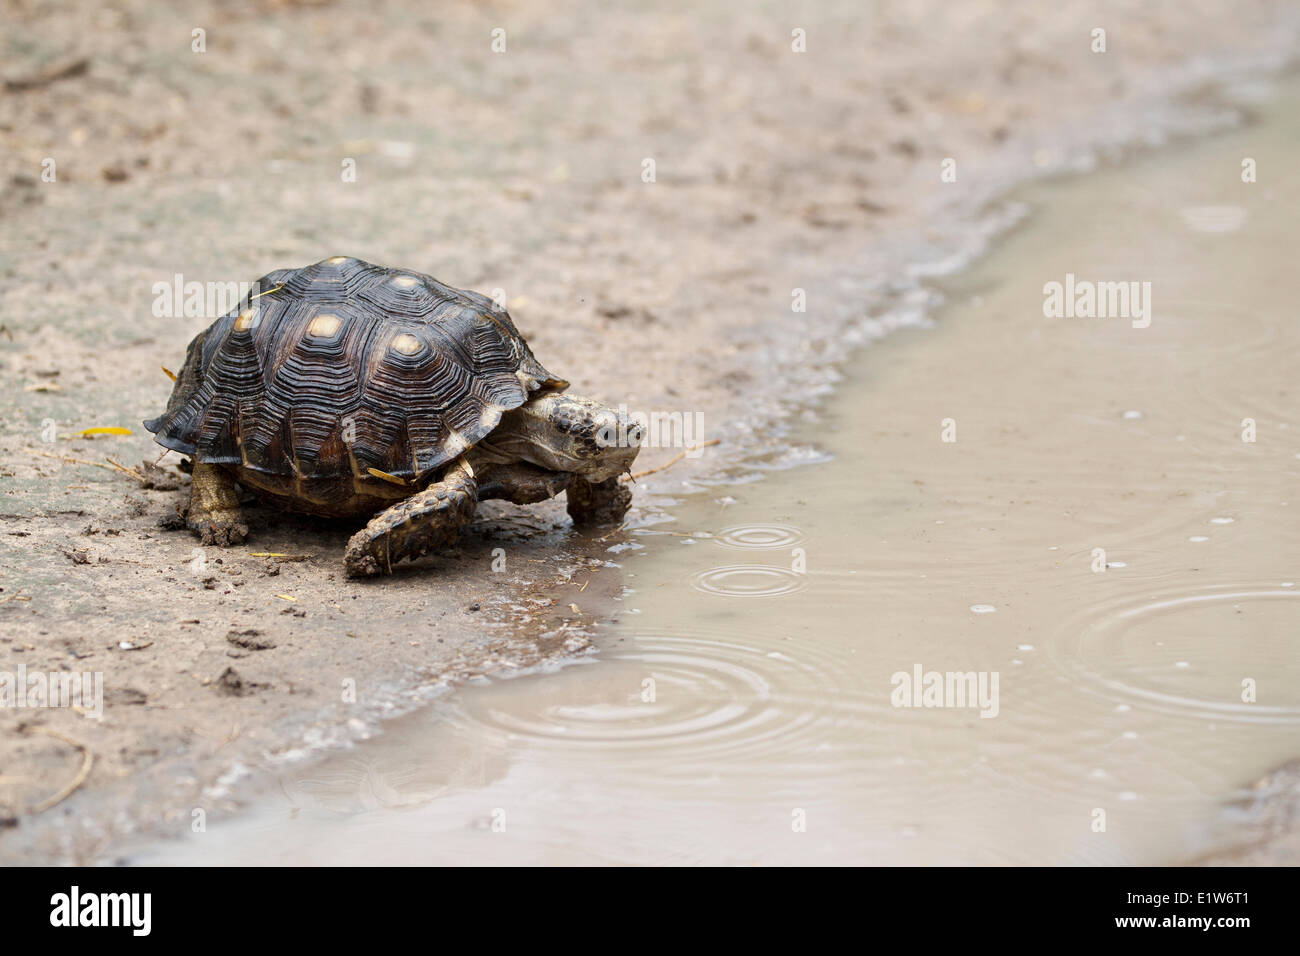 Texas tortoise (Gopherus berlandieri) male about to drink at puddle in dirt road Martin Refuge near Edinburg South Texas. This Stock Photo